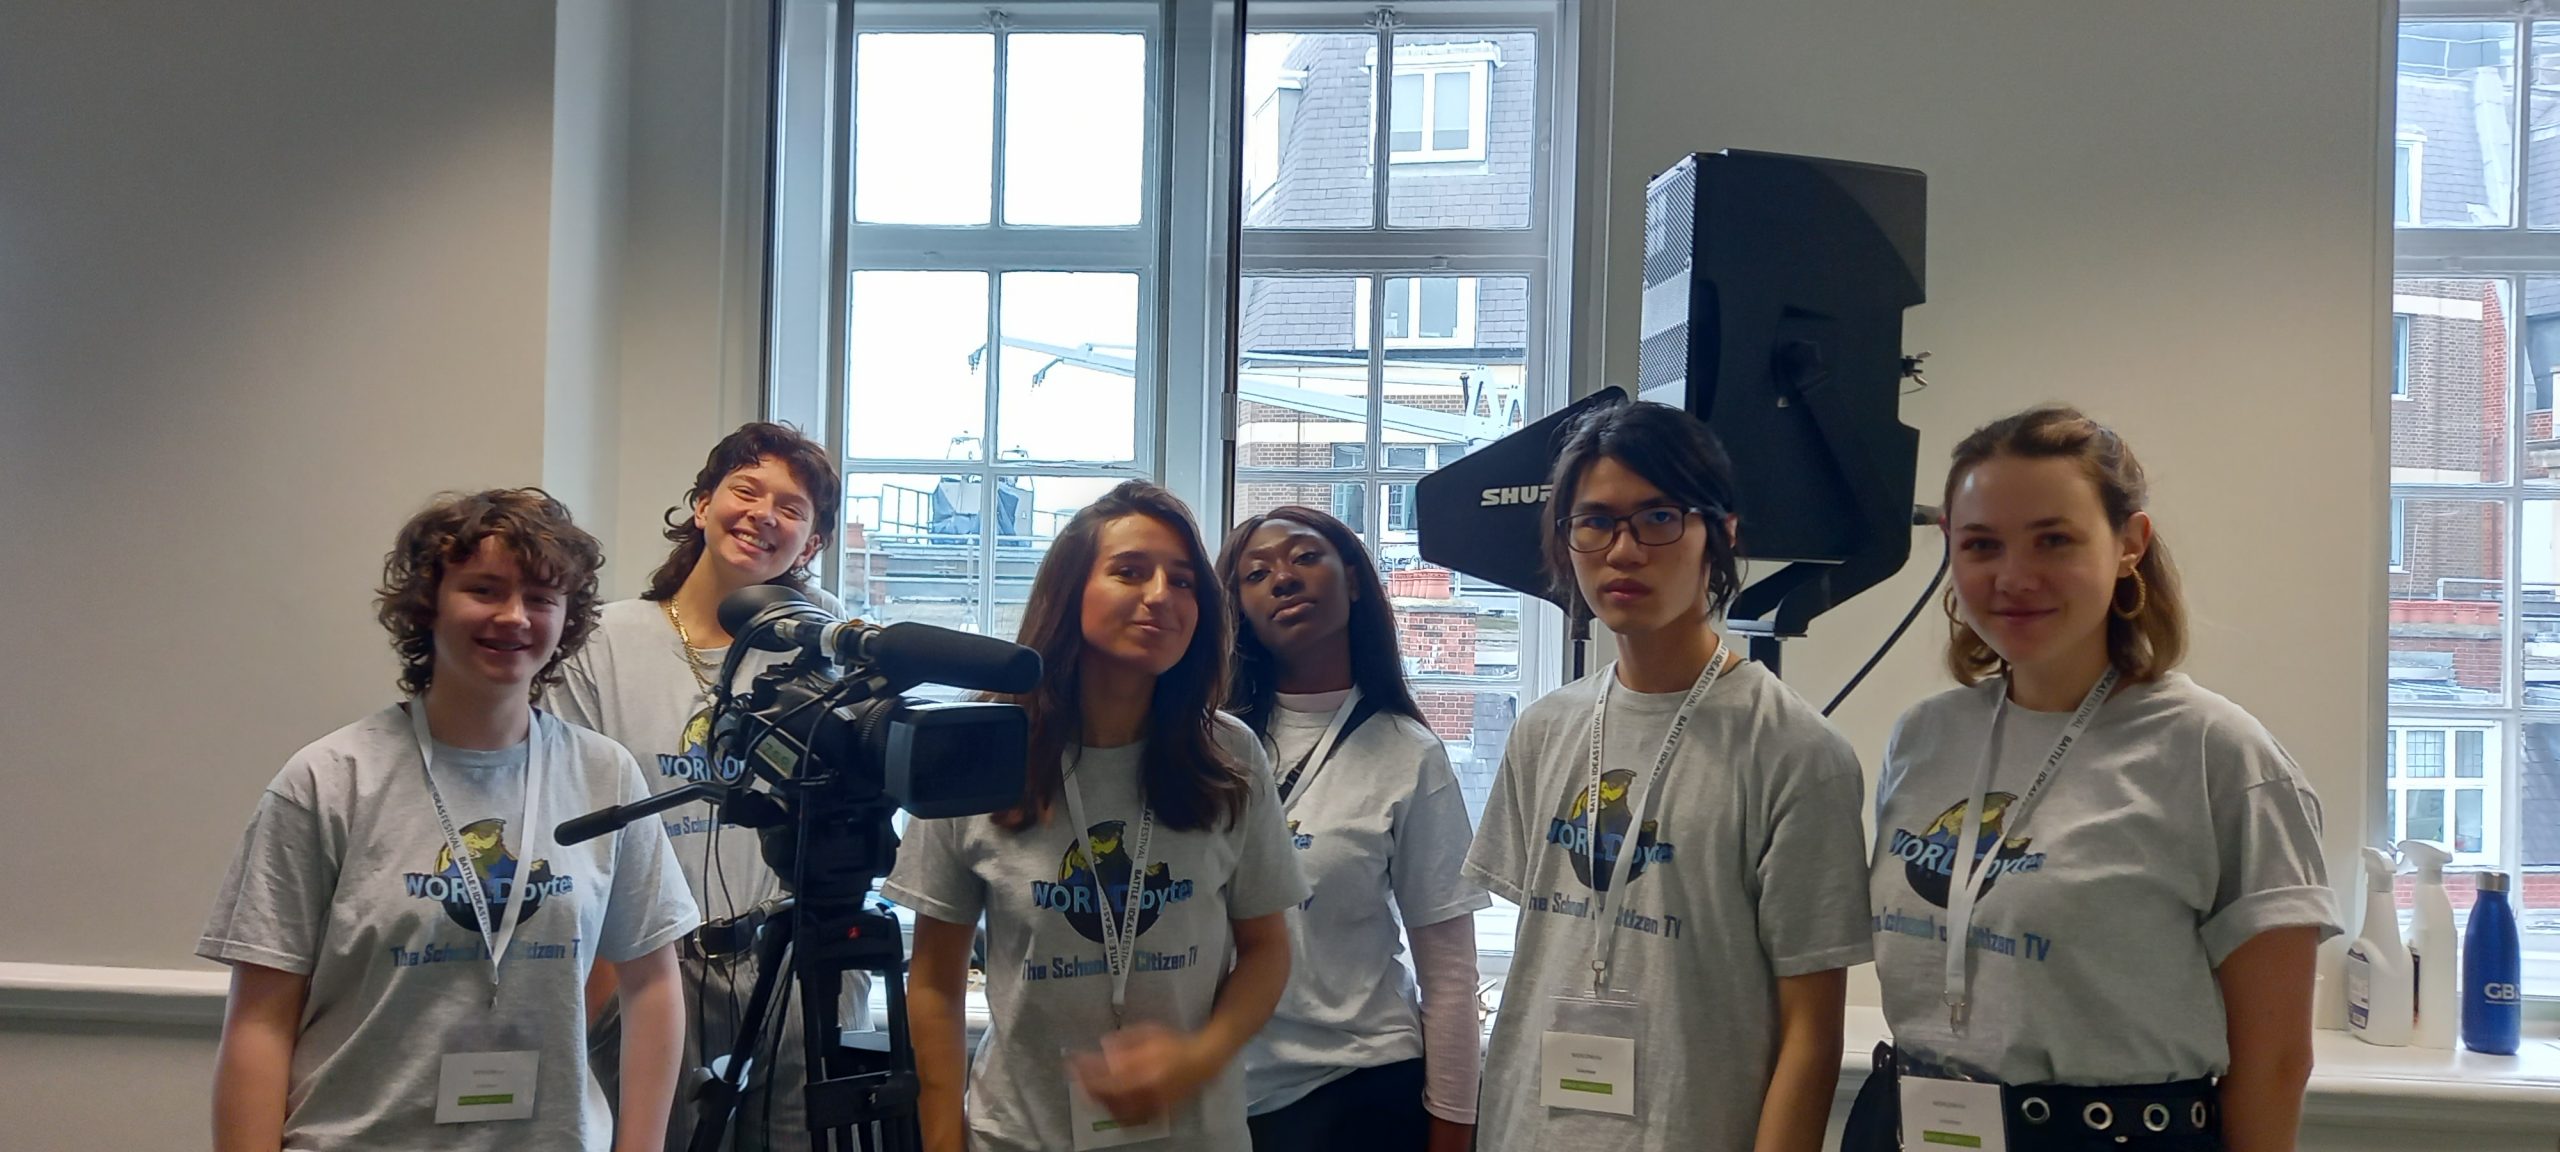 COVID Recovery Grant: Training more young people in media!